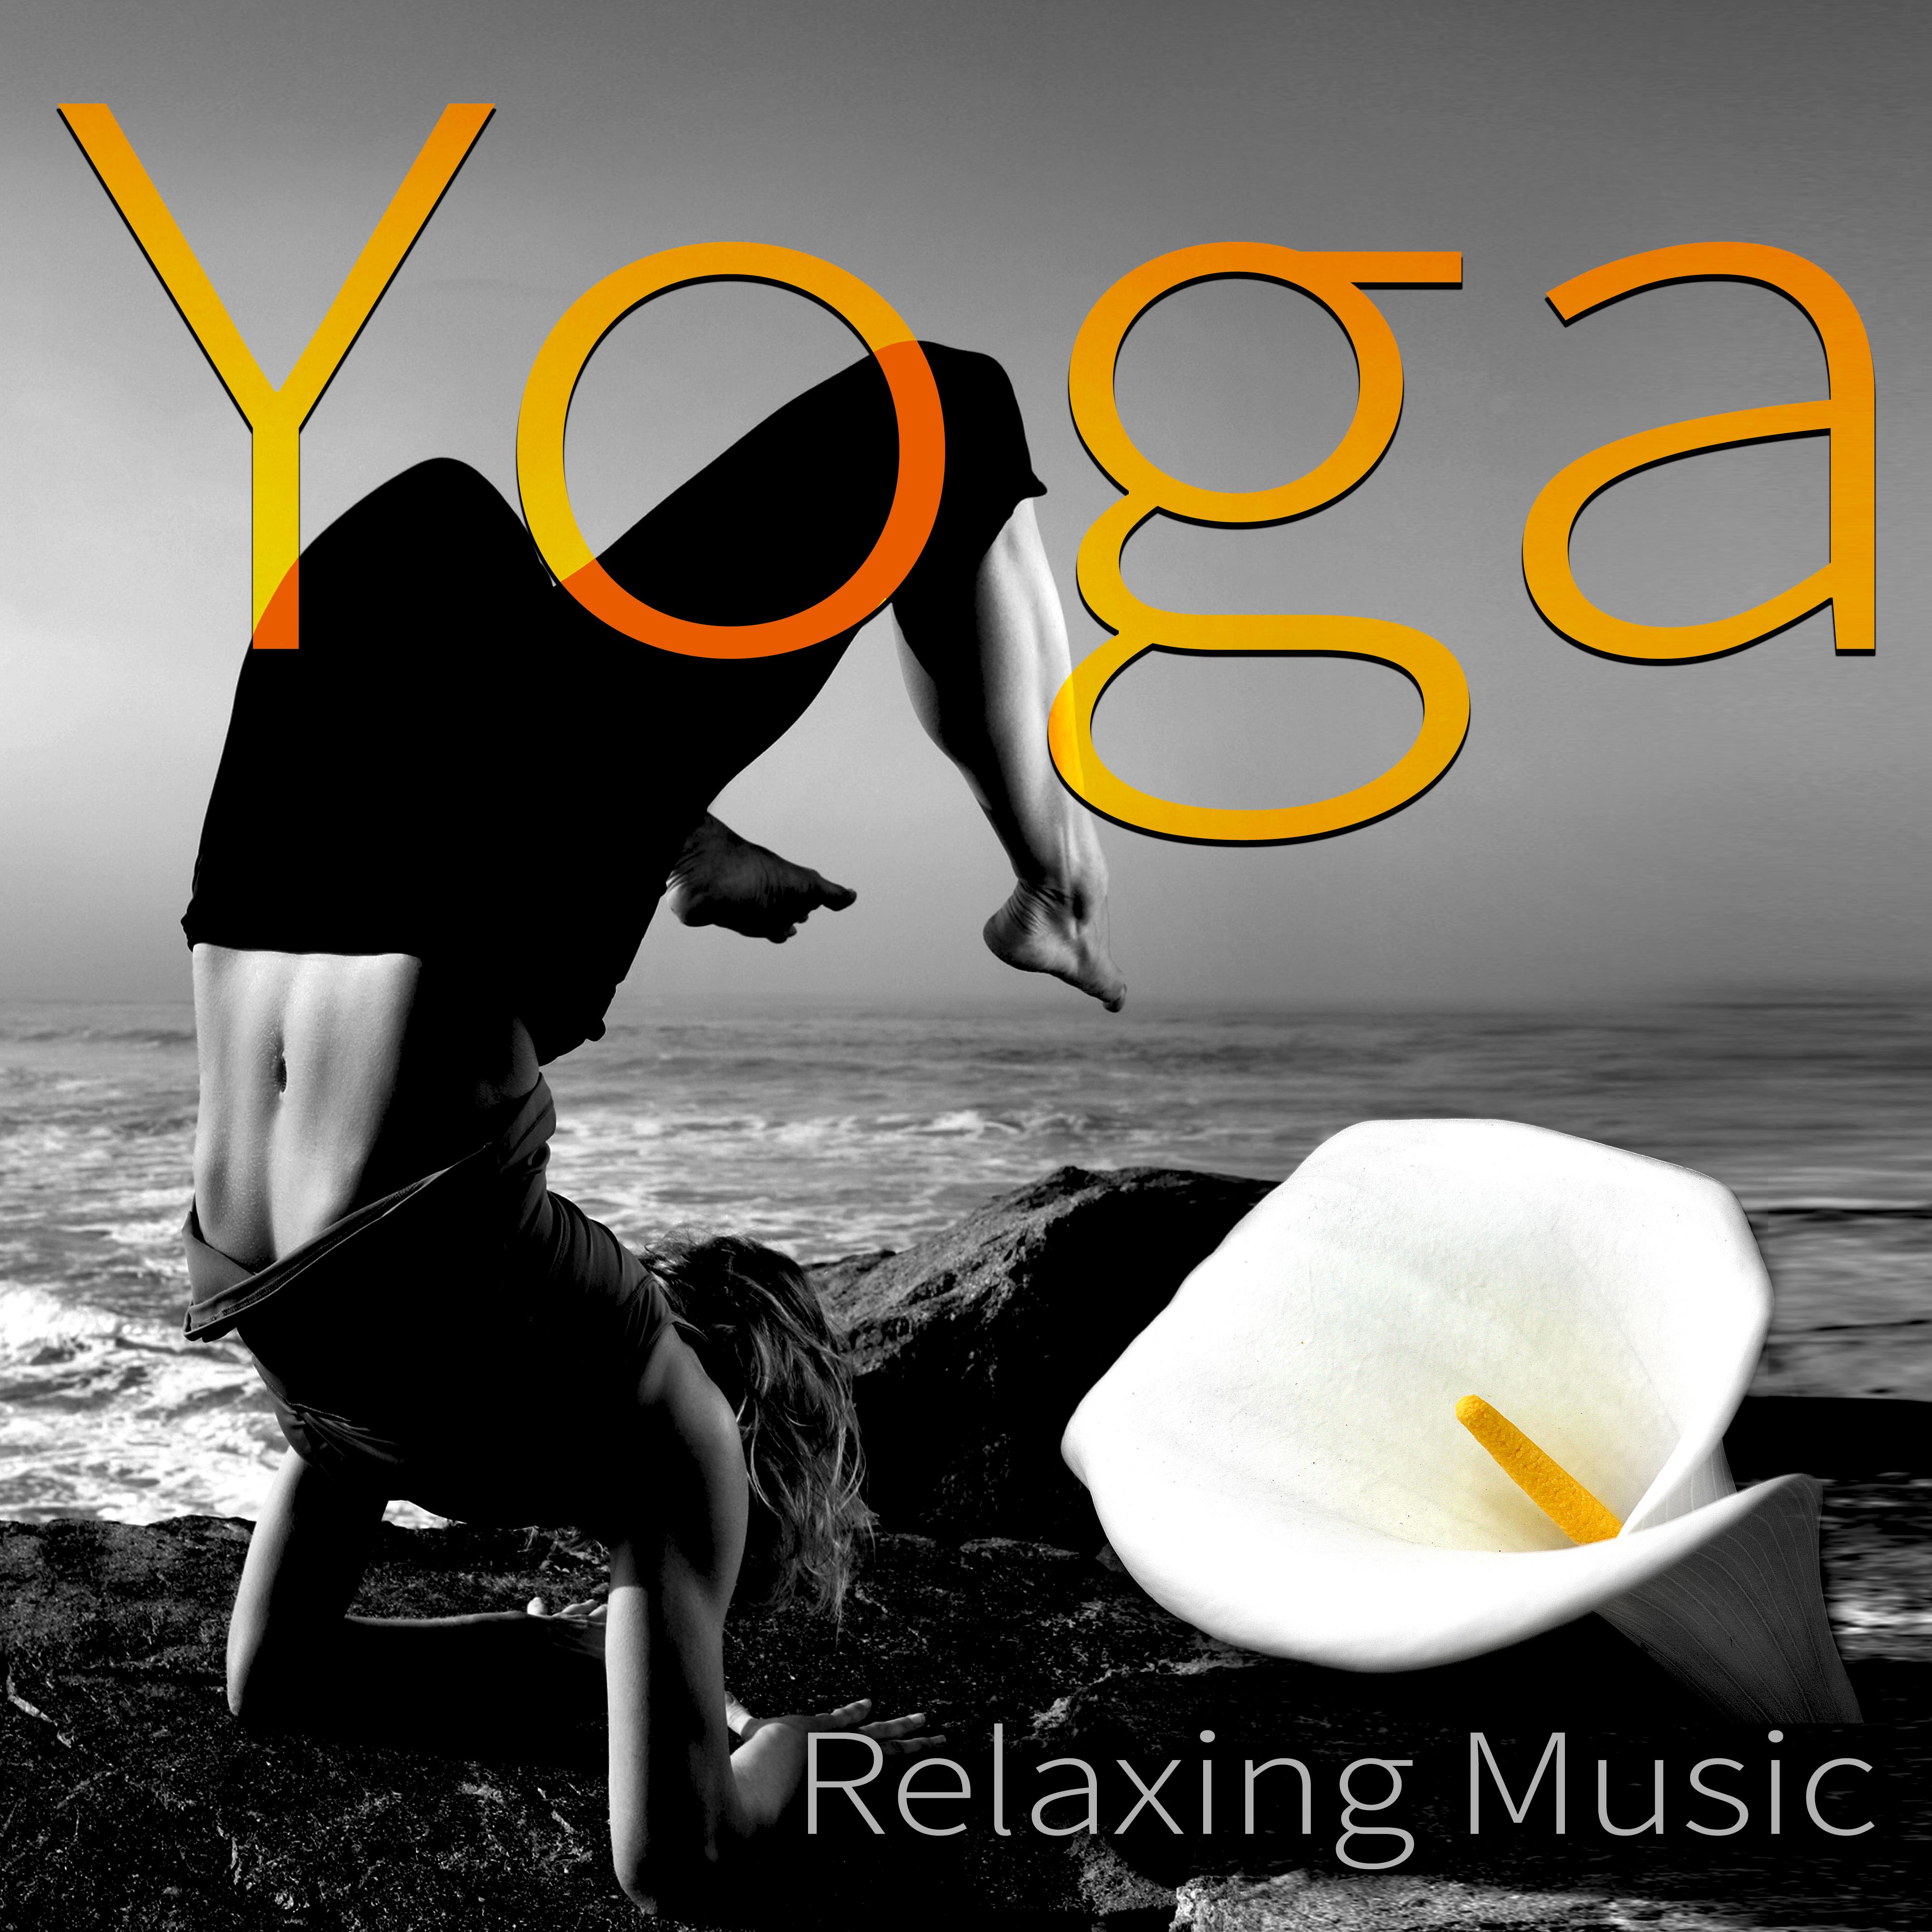 Yoga Relaxing Music  Mindfulness Meditation, Yoga Classes, Mind, Body  Soul, Nature Sounds to Calm Down, Reiki, Kundalini, Massage Relaxation